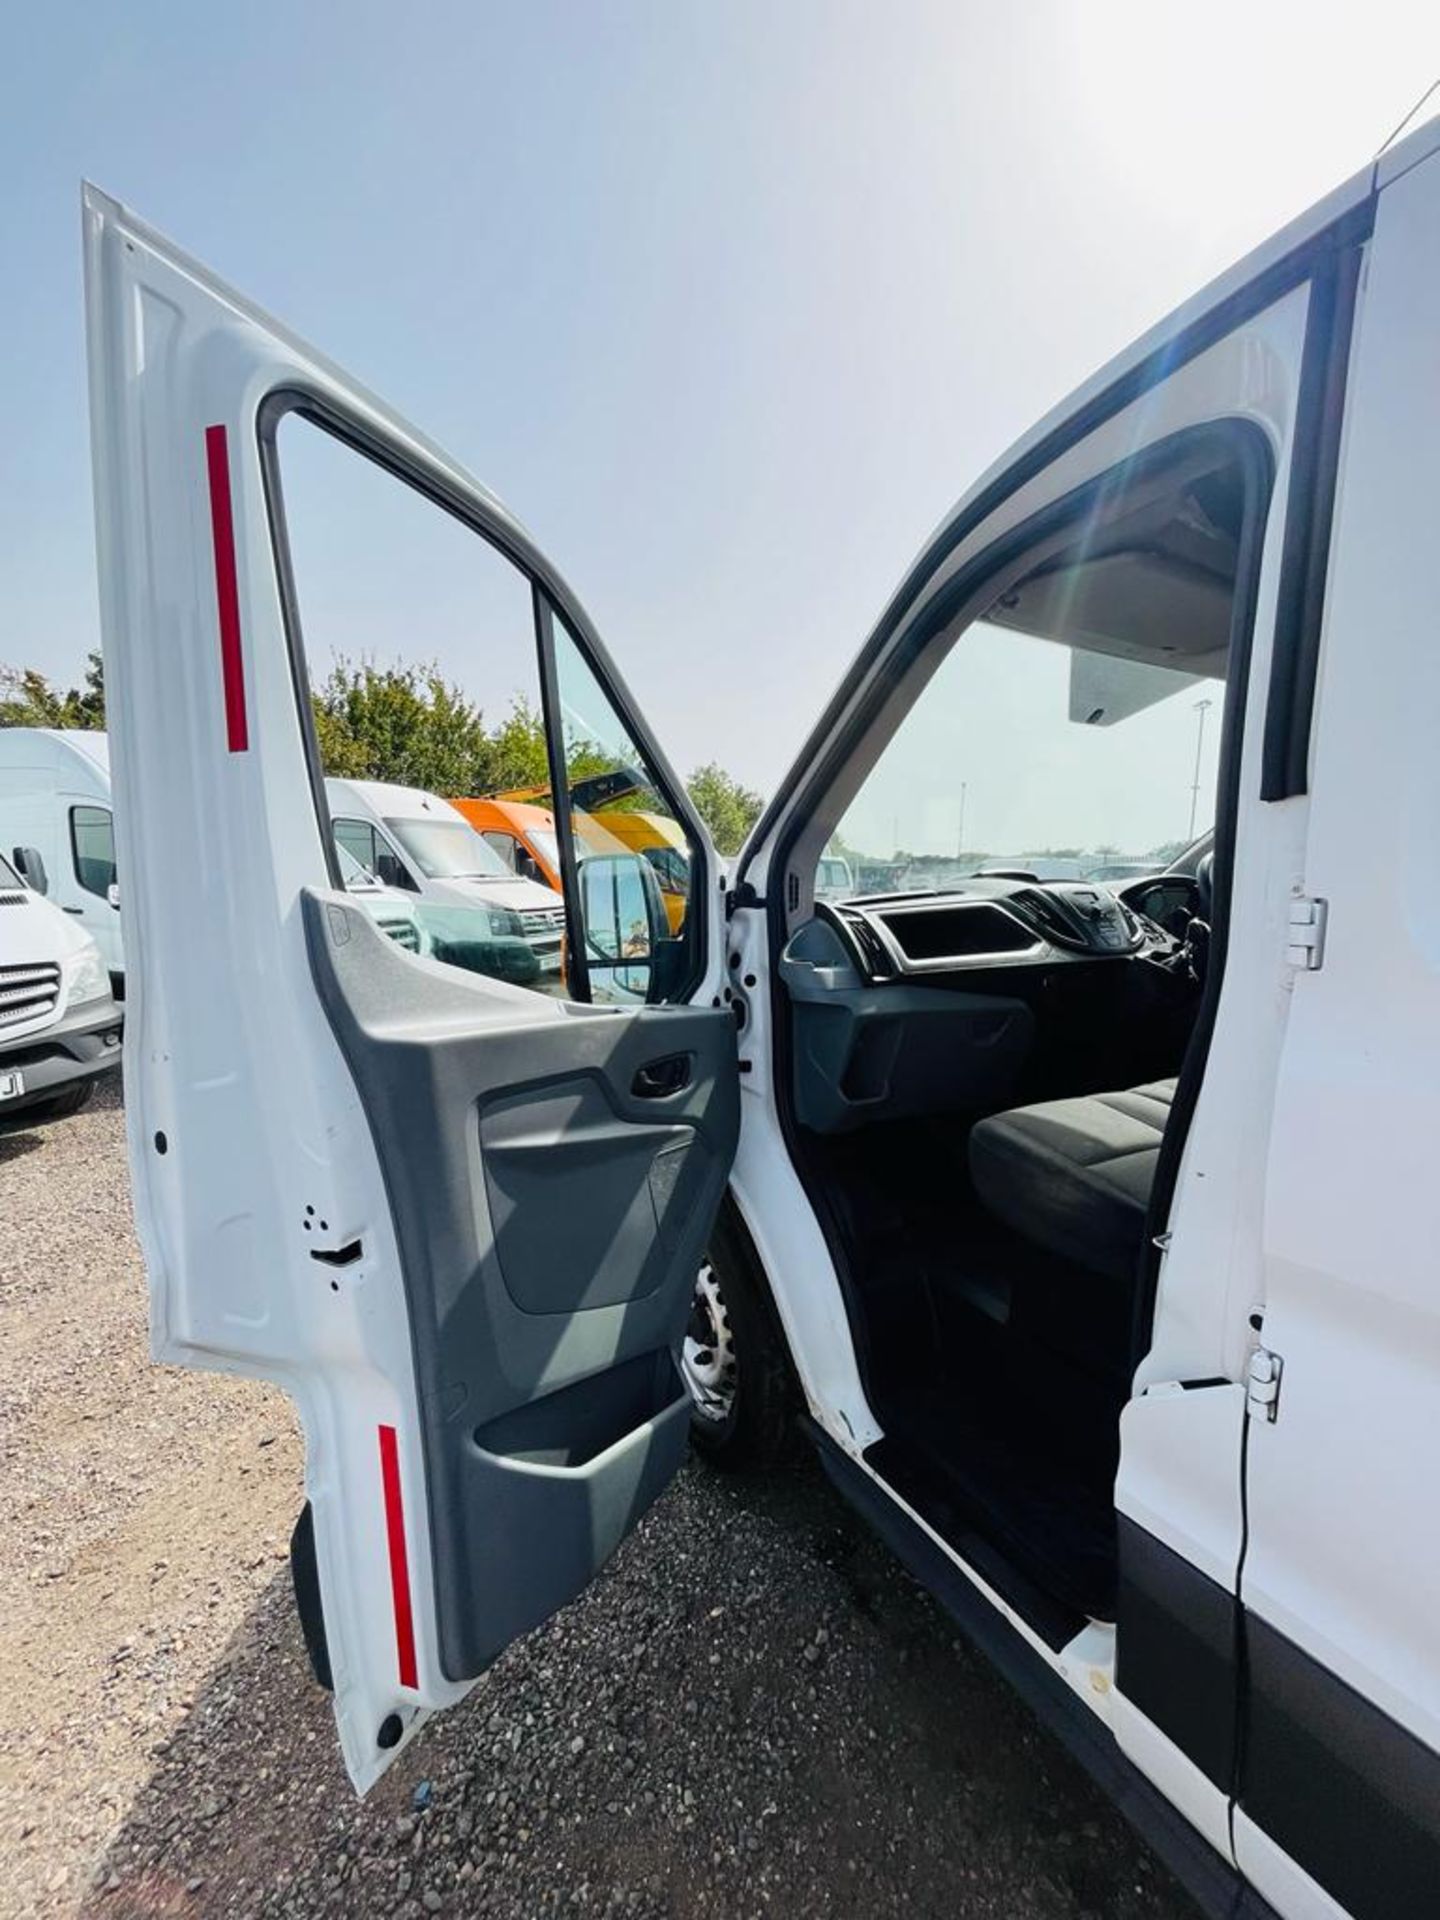 ** ON SALE **Ford Transit Chassis Cab 350 RWD 2.0 TDCI 130 2018 '68 Reg' - Tow Bar - Long Wheel Base - Image 25 of 35